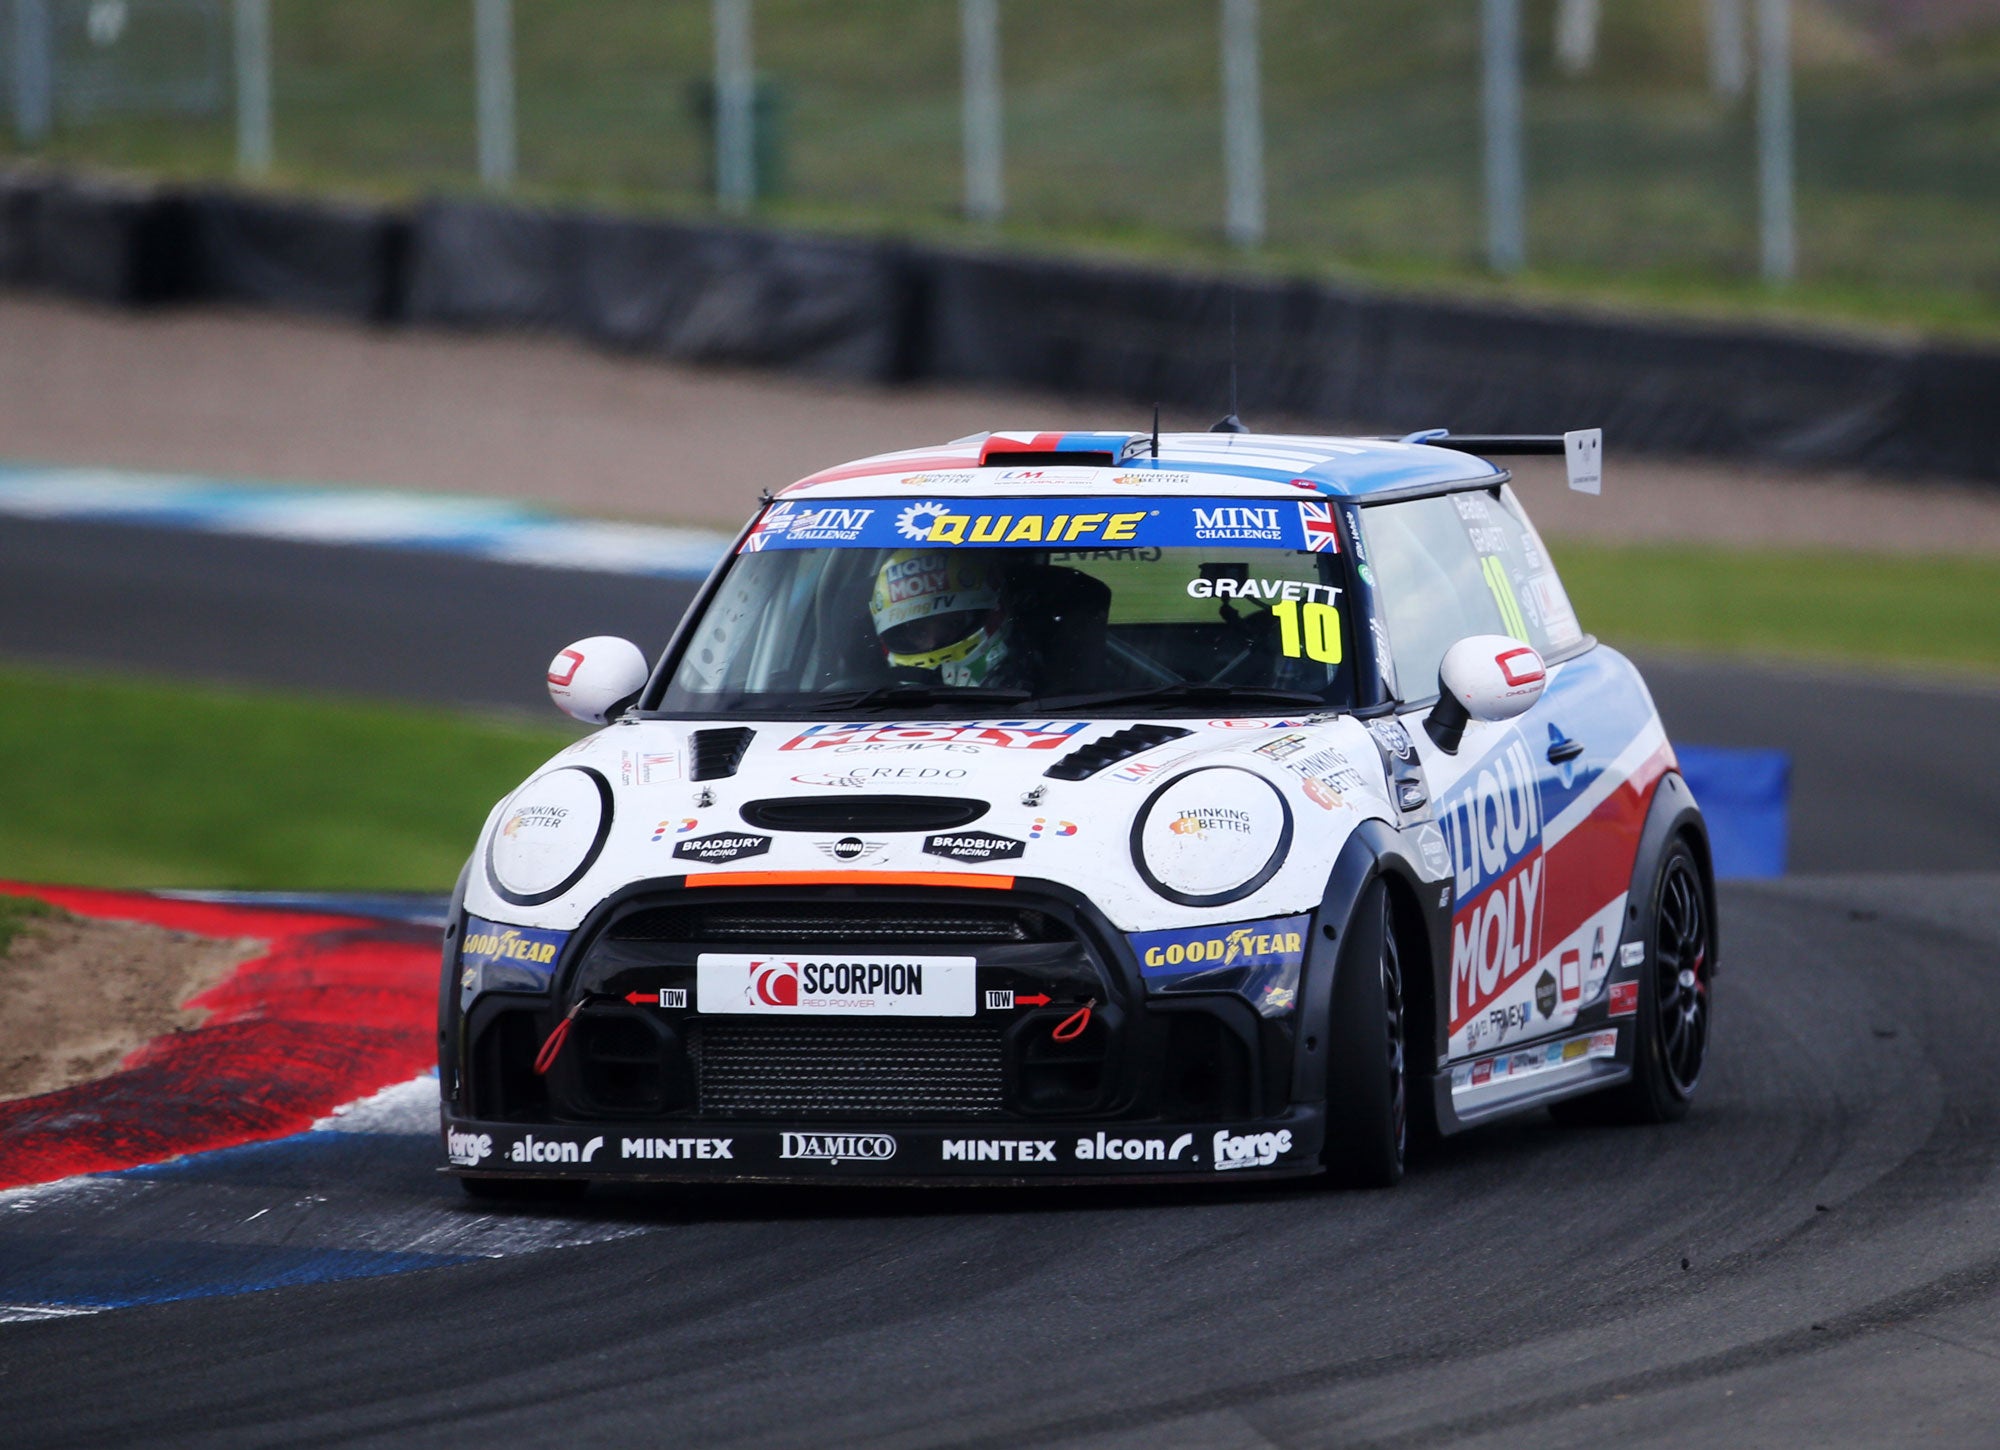 Bradley Gravett son of BTCC British Touring Car Champion Robb Gravett in the MINI Challenge JCW Series at Knockhill in 2022 Oversteering Through Chicane Graves Motorsport Cooper Racing Driver LIQUI MOLY LM Performance Thinking it Better